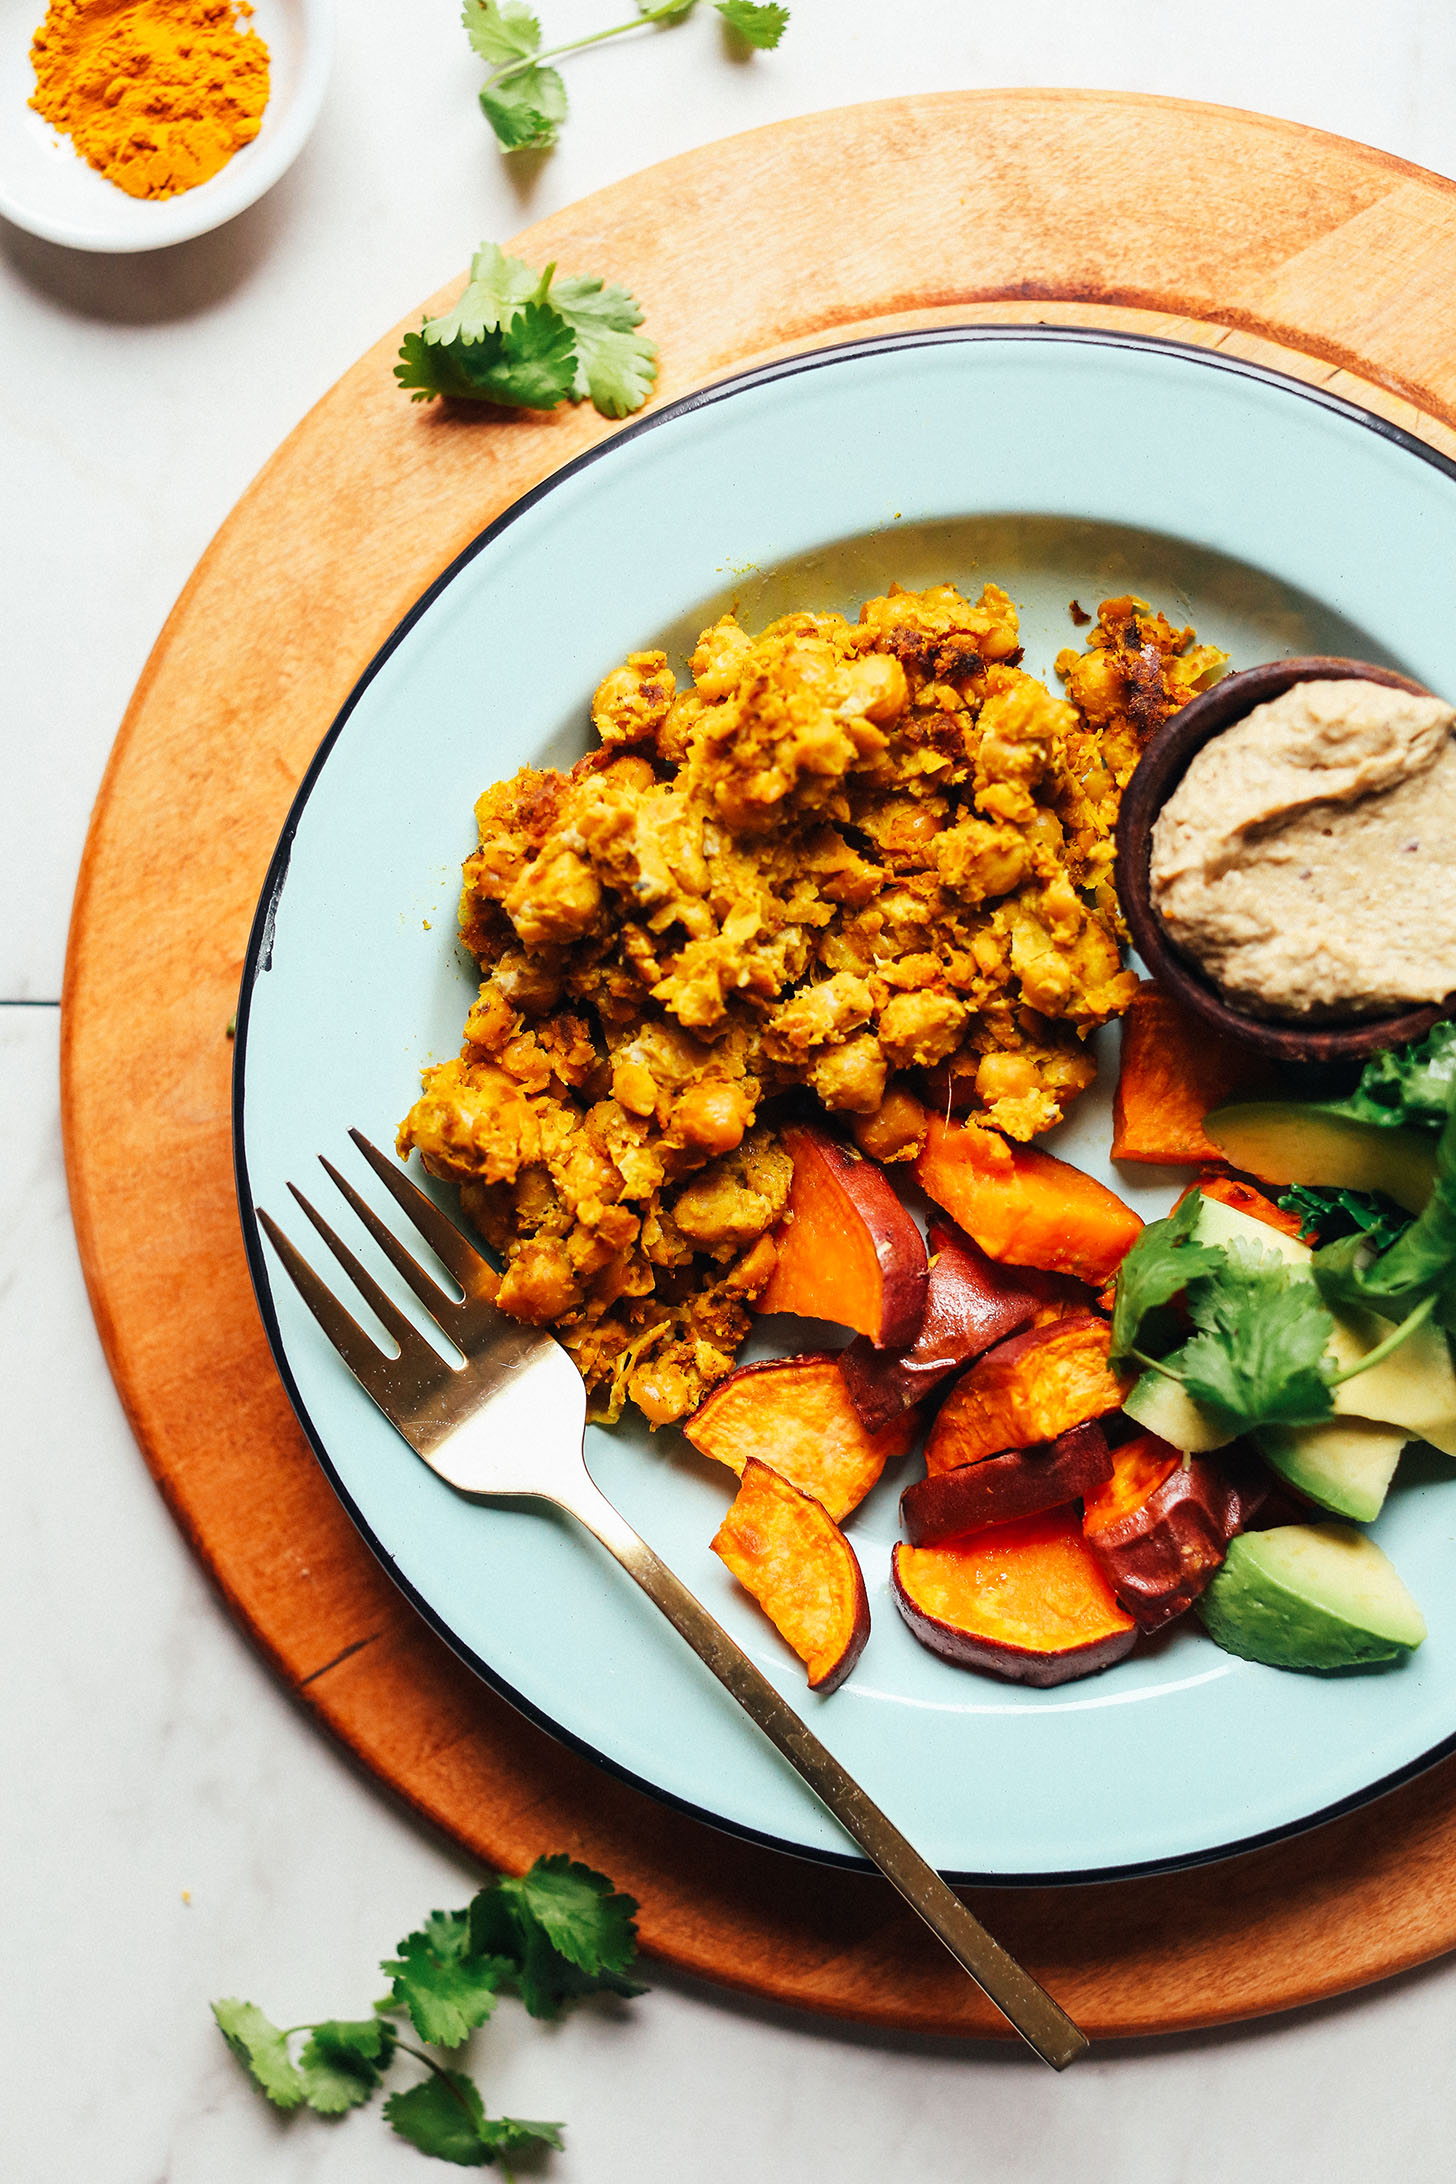 Gluten-free vegan meal of Chickpea Scramble with roasted sweet potatoes, avocado, cilantro, and baba ghanoush